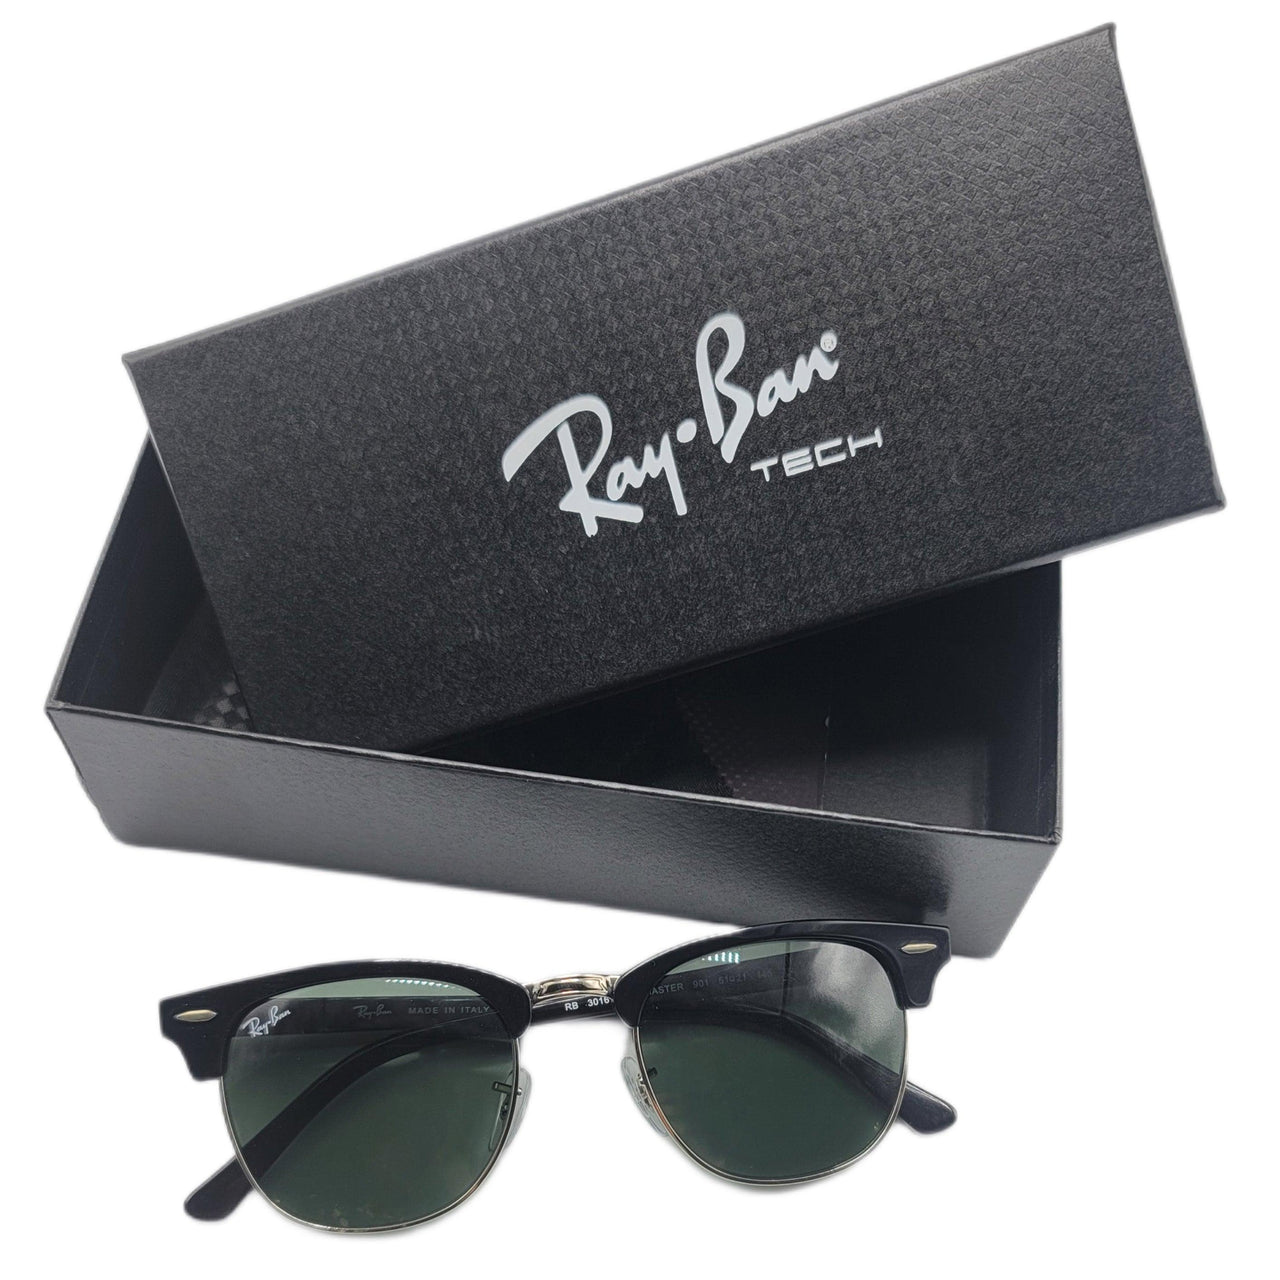 The Bag Couture Sunglasses Ray Ban Clubmaster Sunglasses SGR